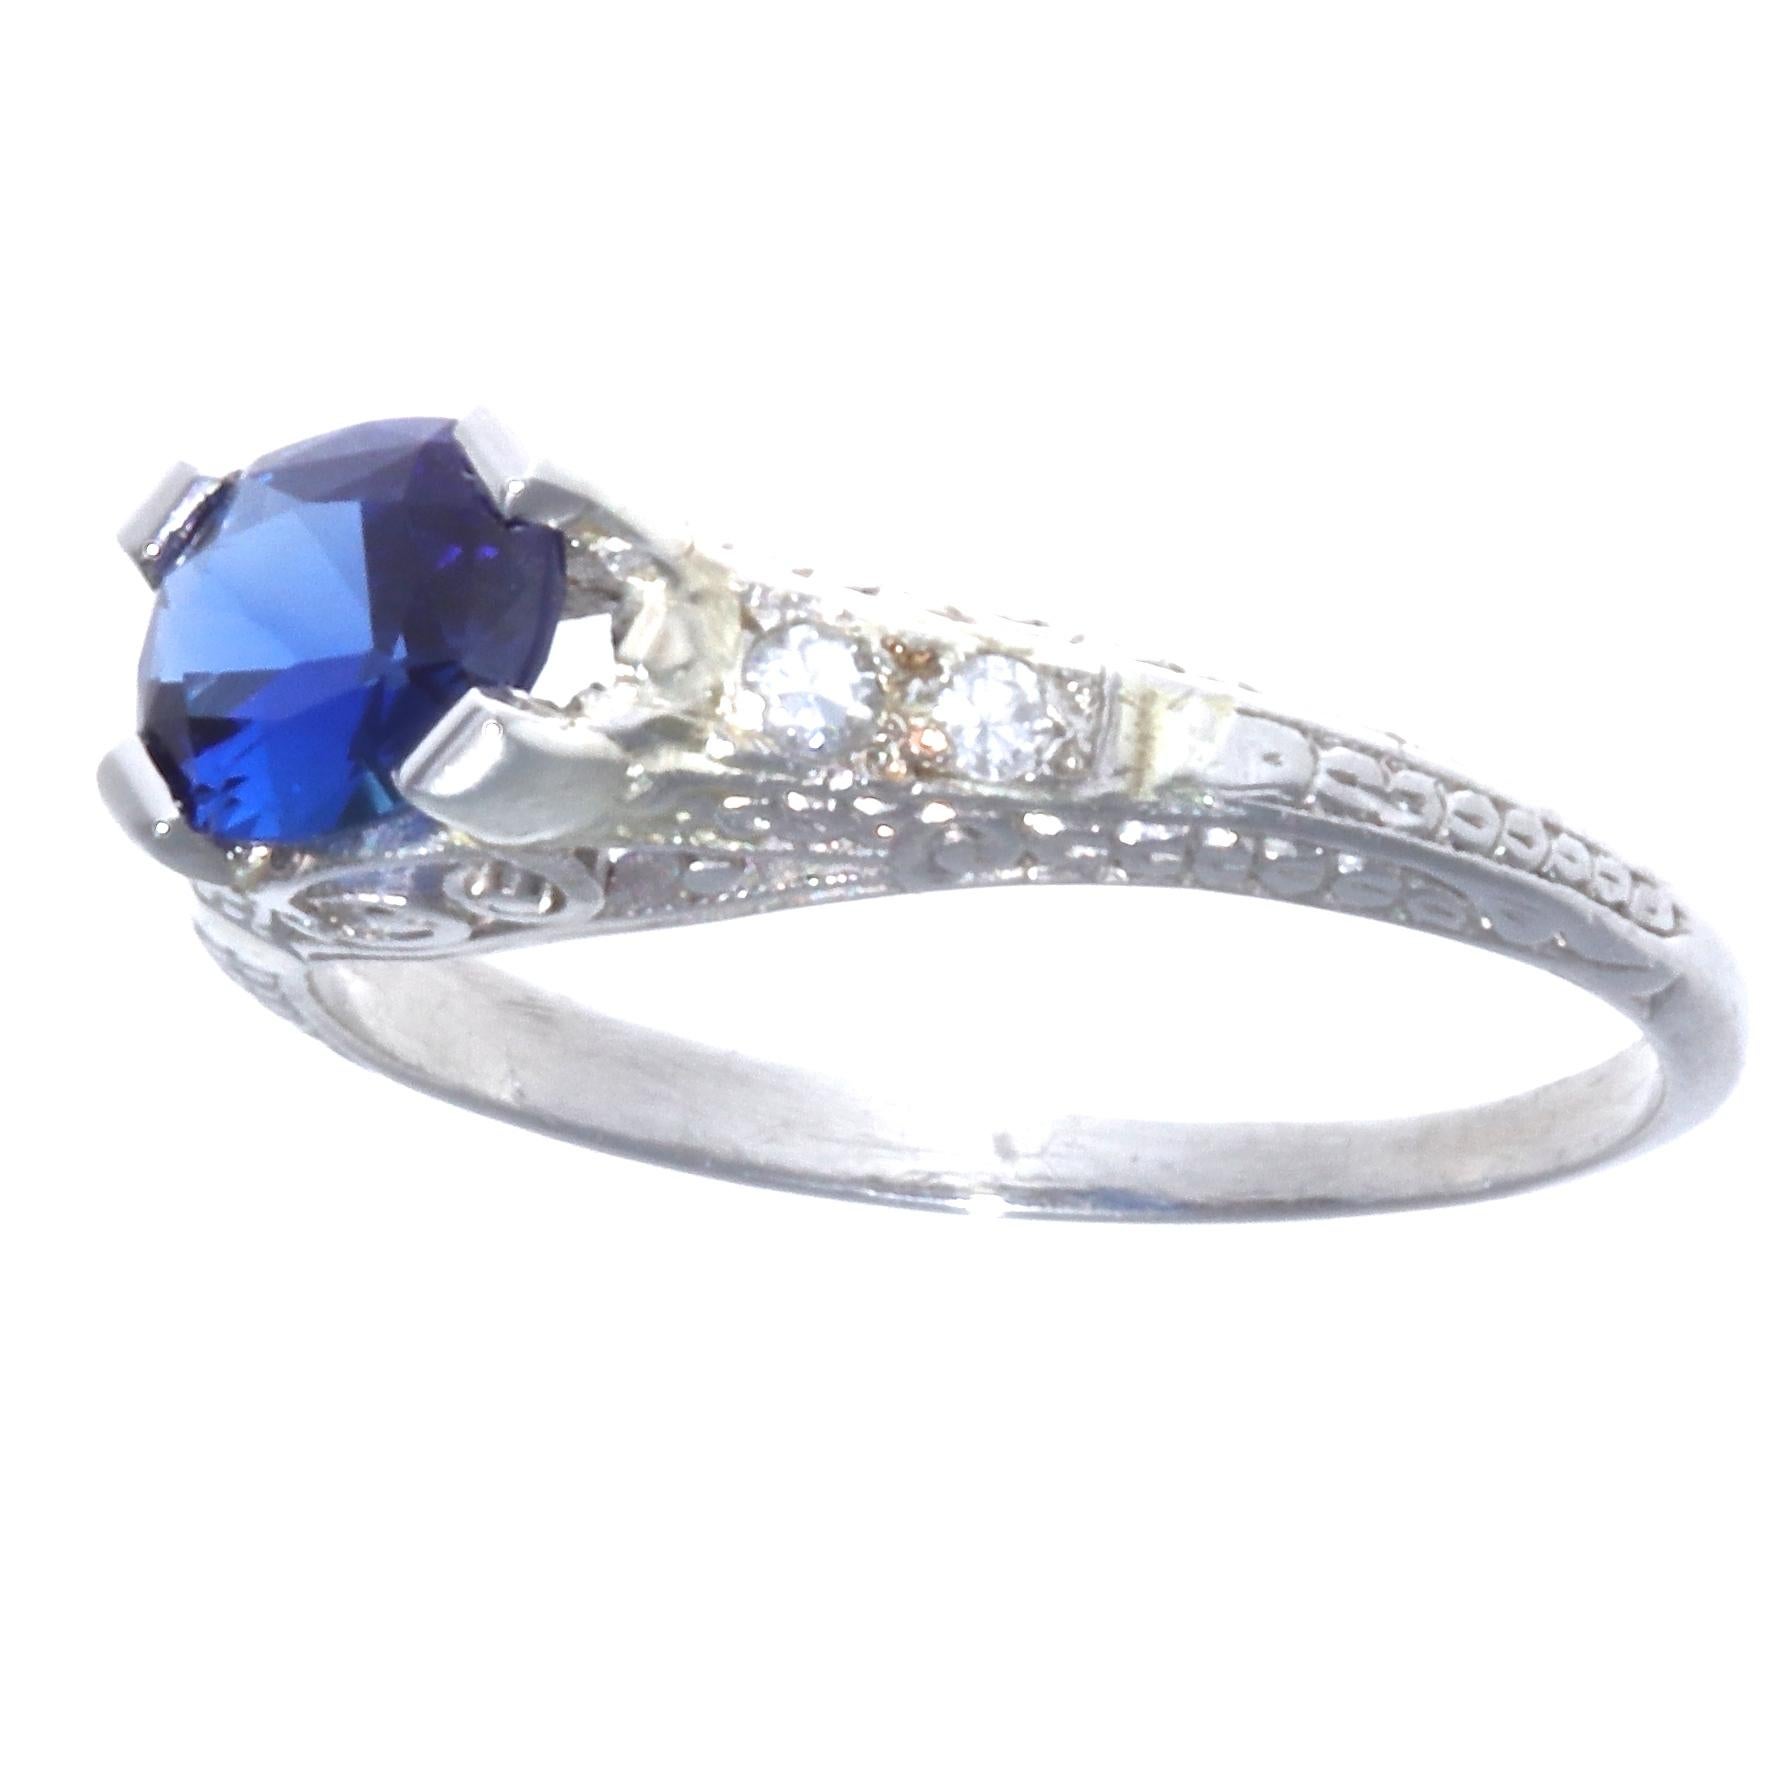 So elegant and fun! Just like an Art Deco flapper girl. Wear this ring to a party, or every day to stand out from the crowd. The filigree on the band make it extraordinary and one of a kind. The ring features a cushion cut sapphire approx 0.70